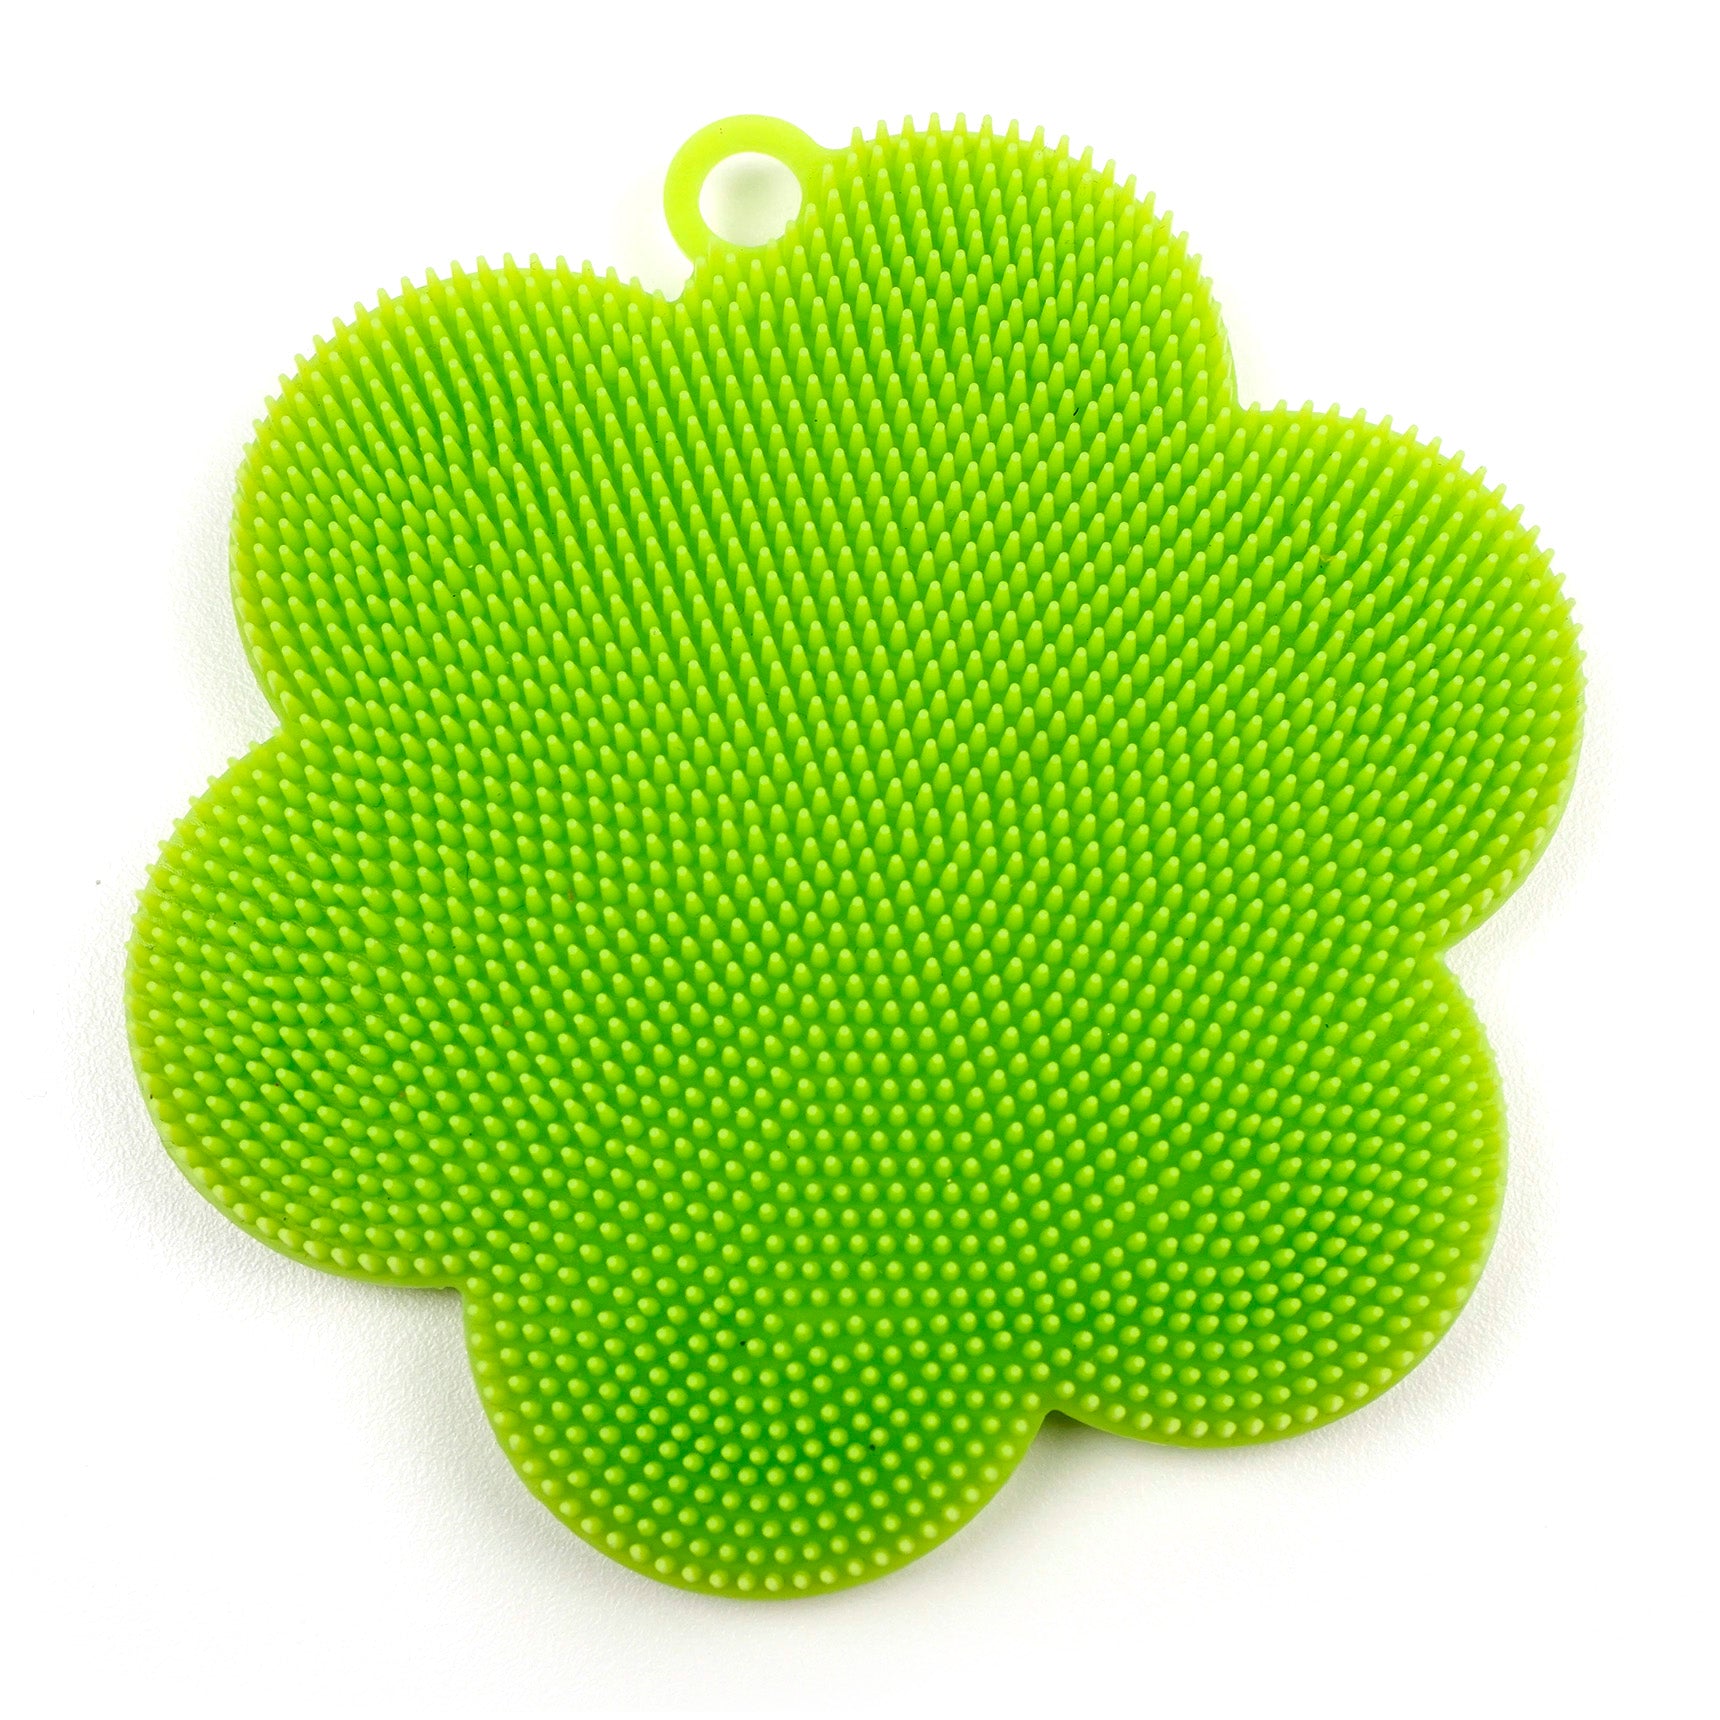 View RSVP - Silicone Soft Scrubber, Green